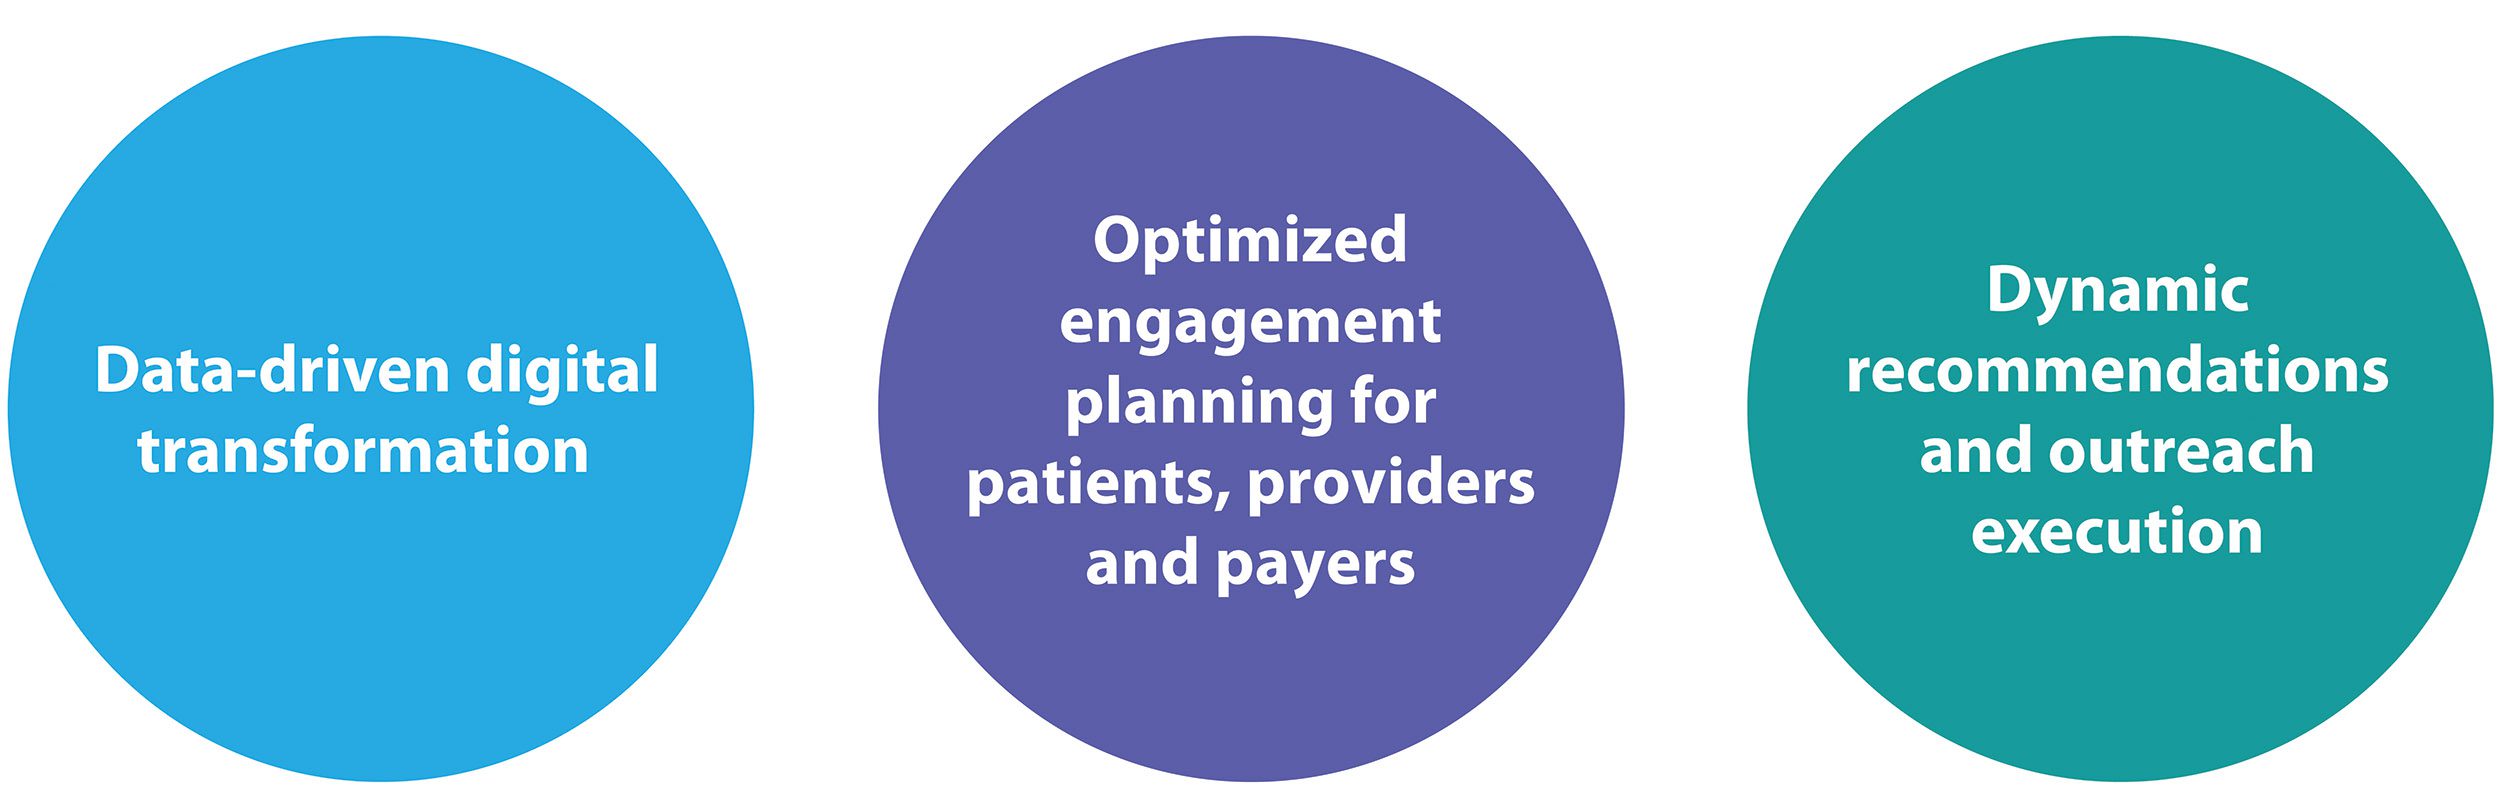 Data-driven digital transformation | Optimized engagement planning for patients, providers and payers | Dynamic recommendations and outreach execution